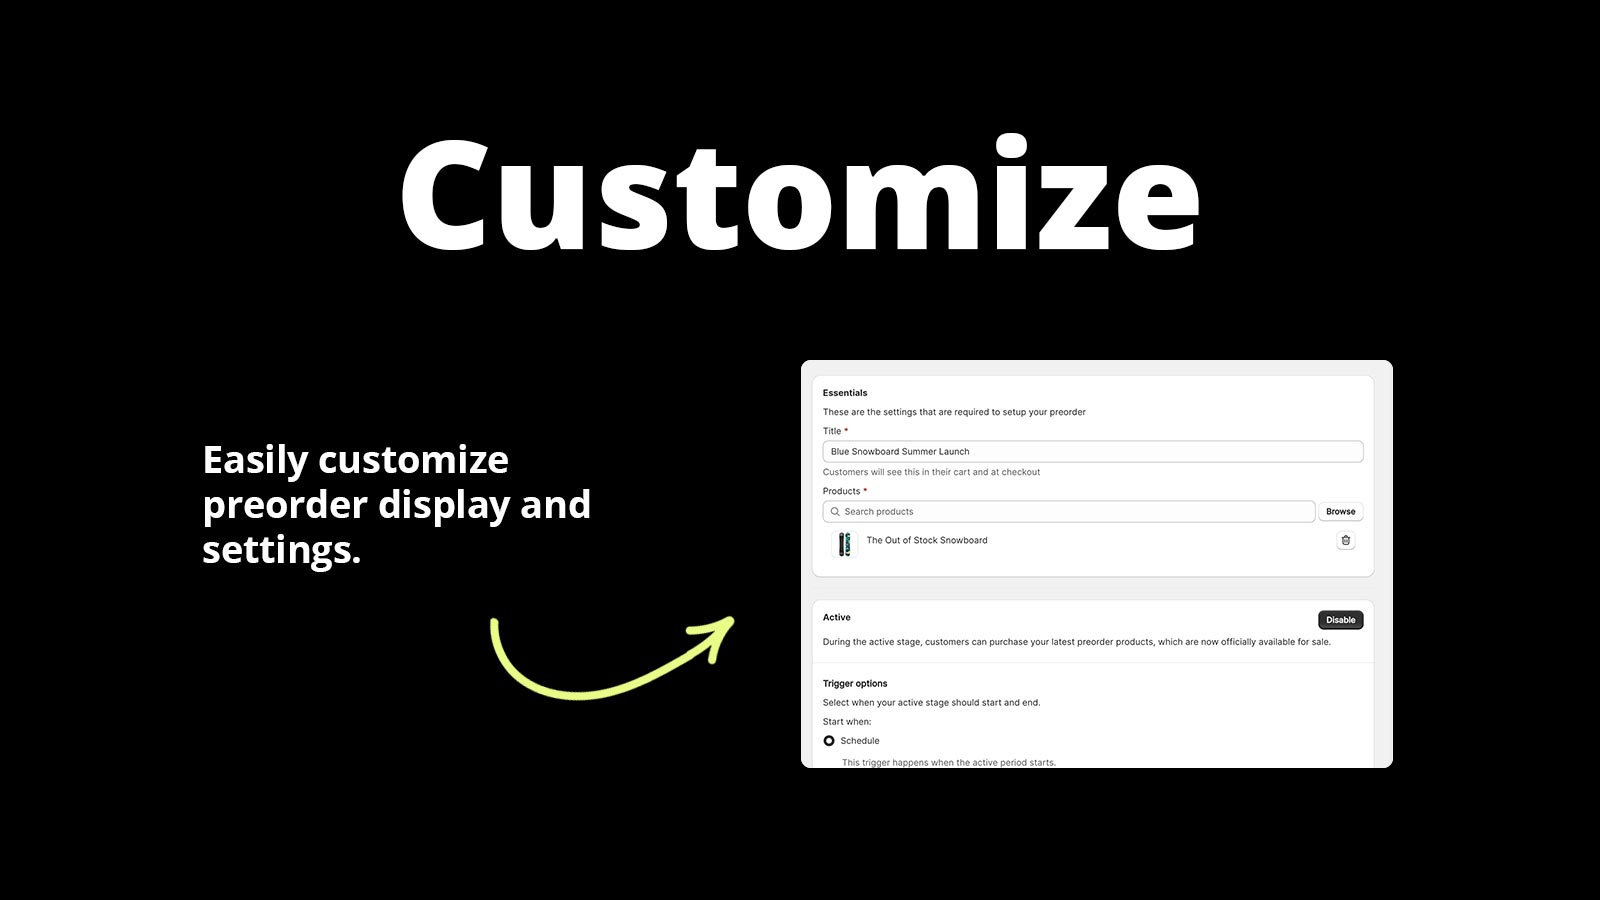 Customize. Easily customize preorder display and settings.